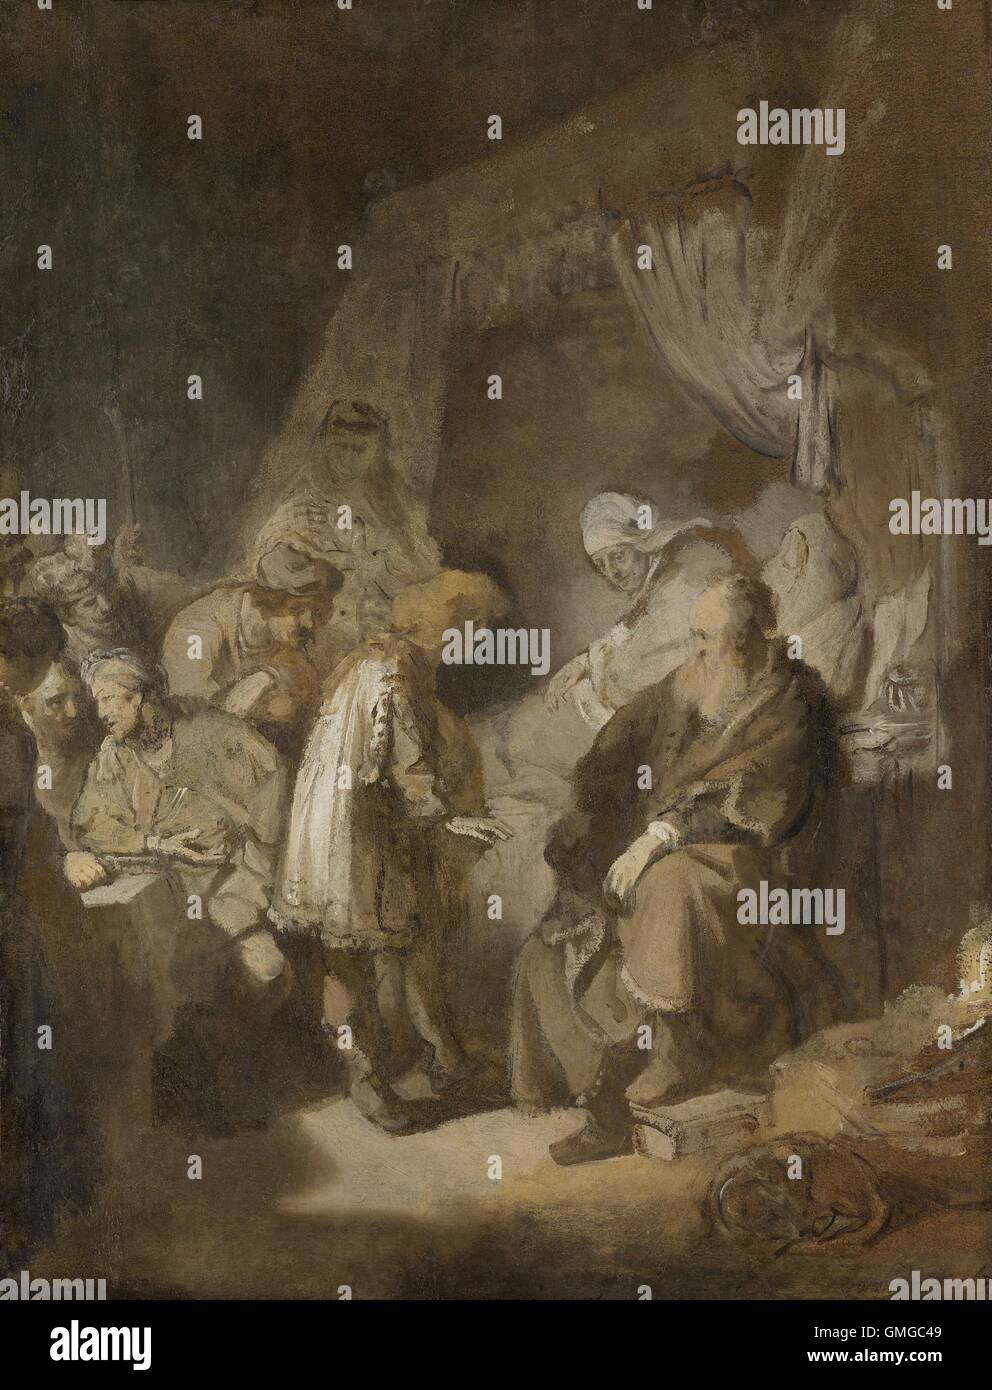 Joseph Telling his Dreams to his Parents and Brothers, by Rembrandt, 1633, Dutch oil painting. As his mother Rachel watches, Joseph speaks to his father Jacob. In left, his brothers talk among themselves (BSLOC 2016 3 14) Stock Photo